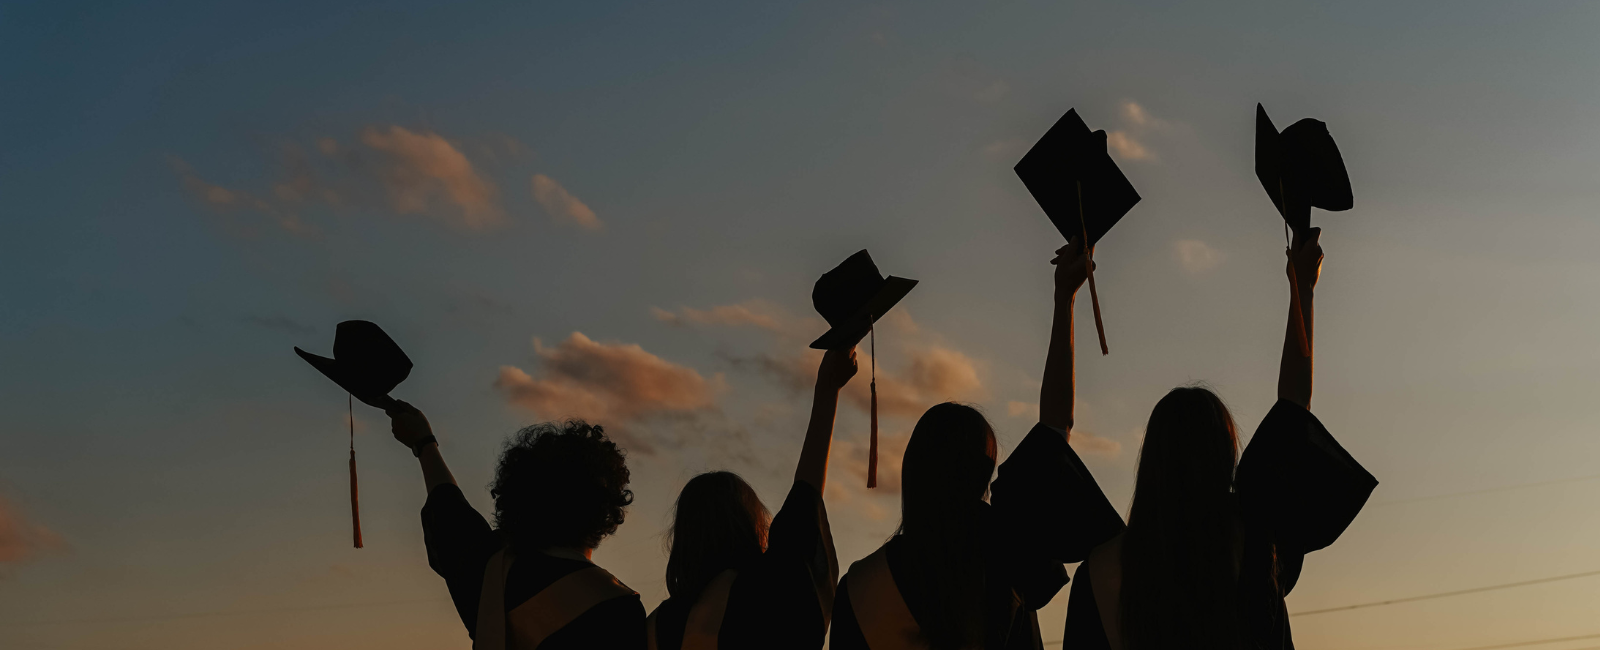 4 people wearing graduation gowns holding up their caps against a sunset